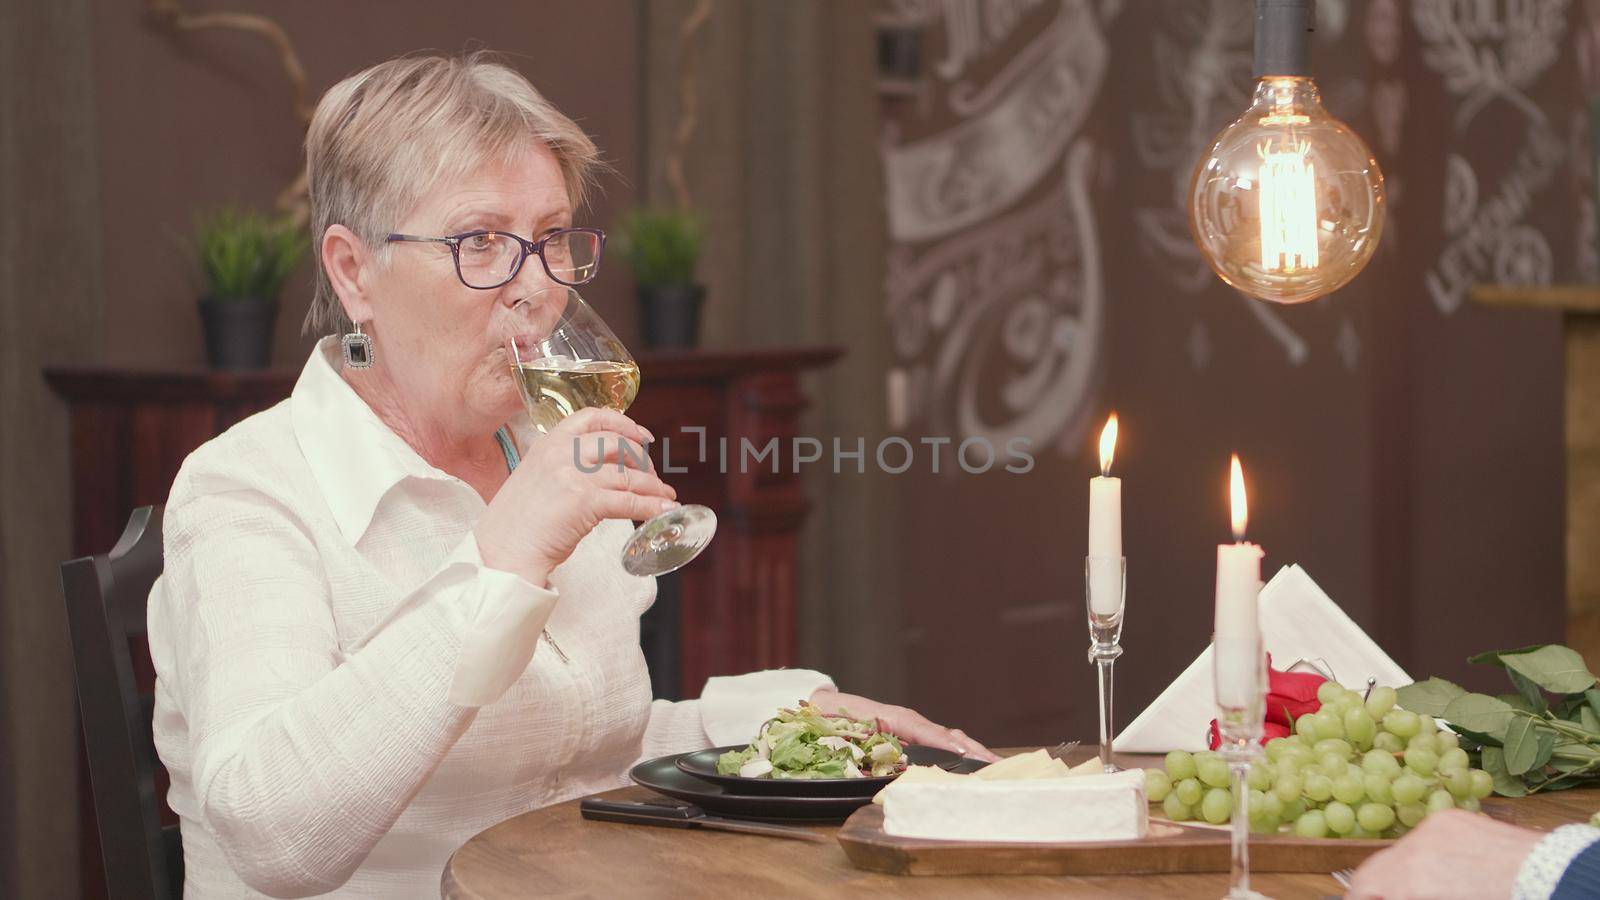 Lovely old lady drinking wine during a romantic date by DCStudio